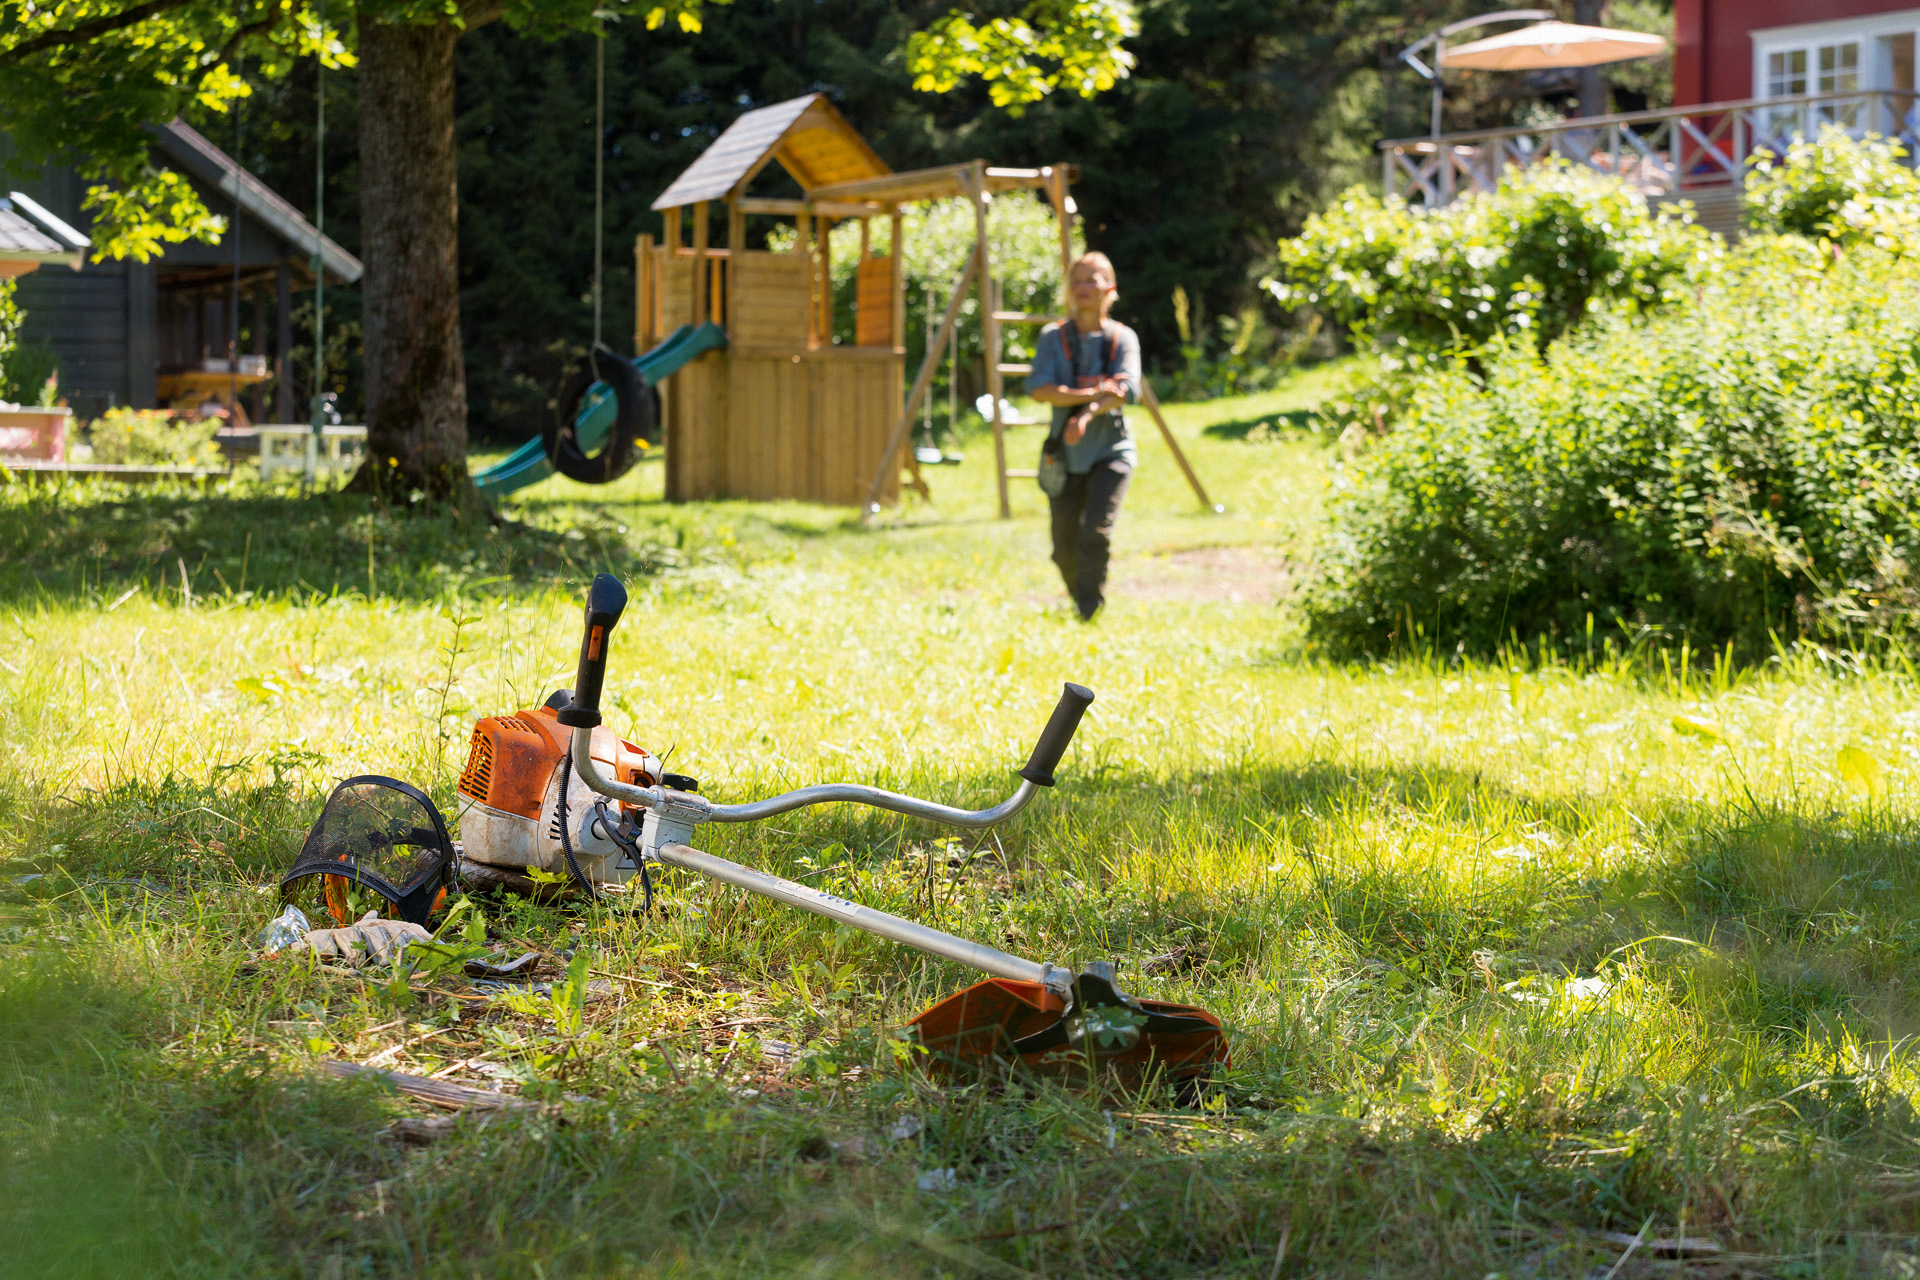 A STIHL FS 240 brushcutter lies on the ground in a yard, with play equipment and a person approaching in the background